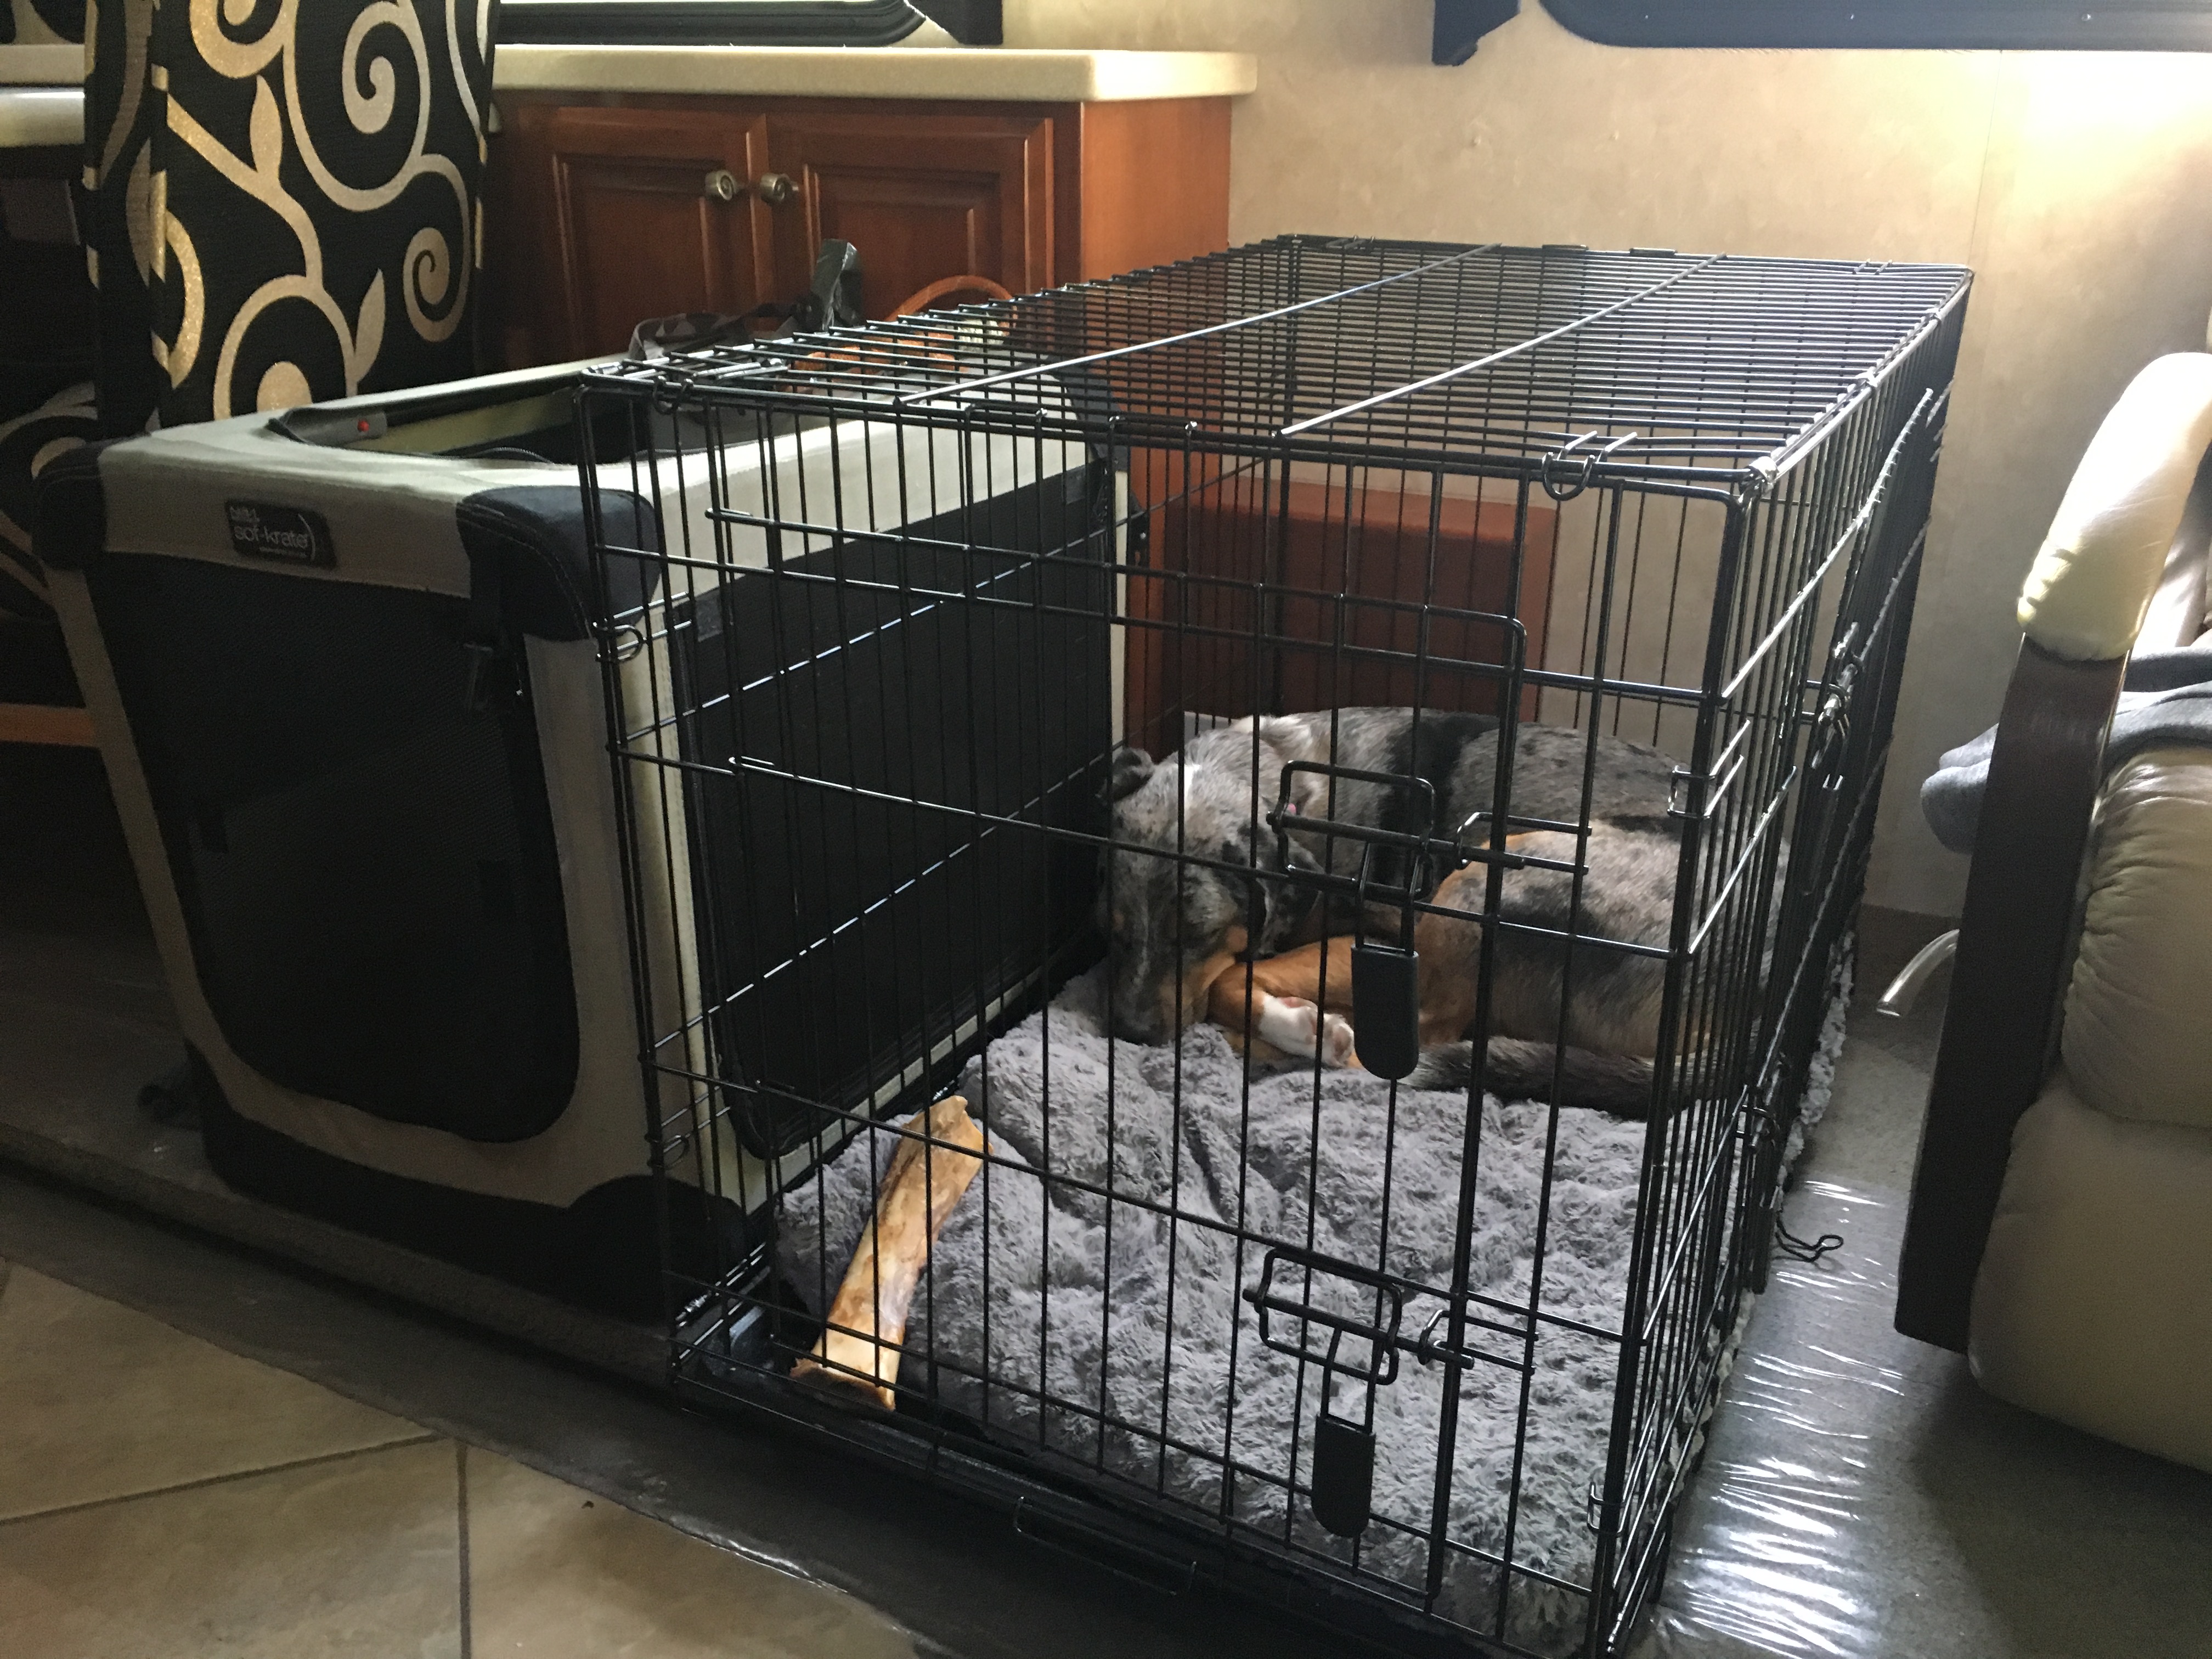 Two dogs, two crates